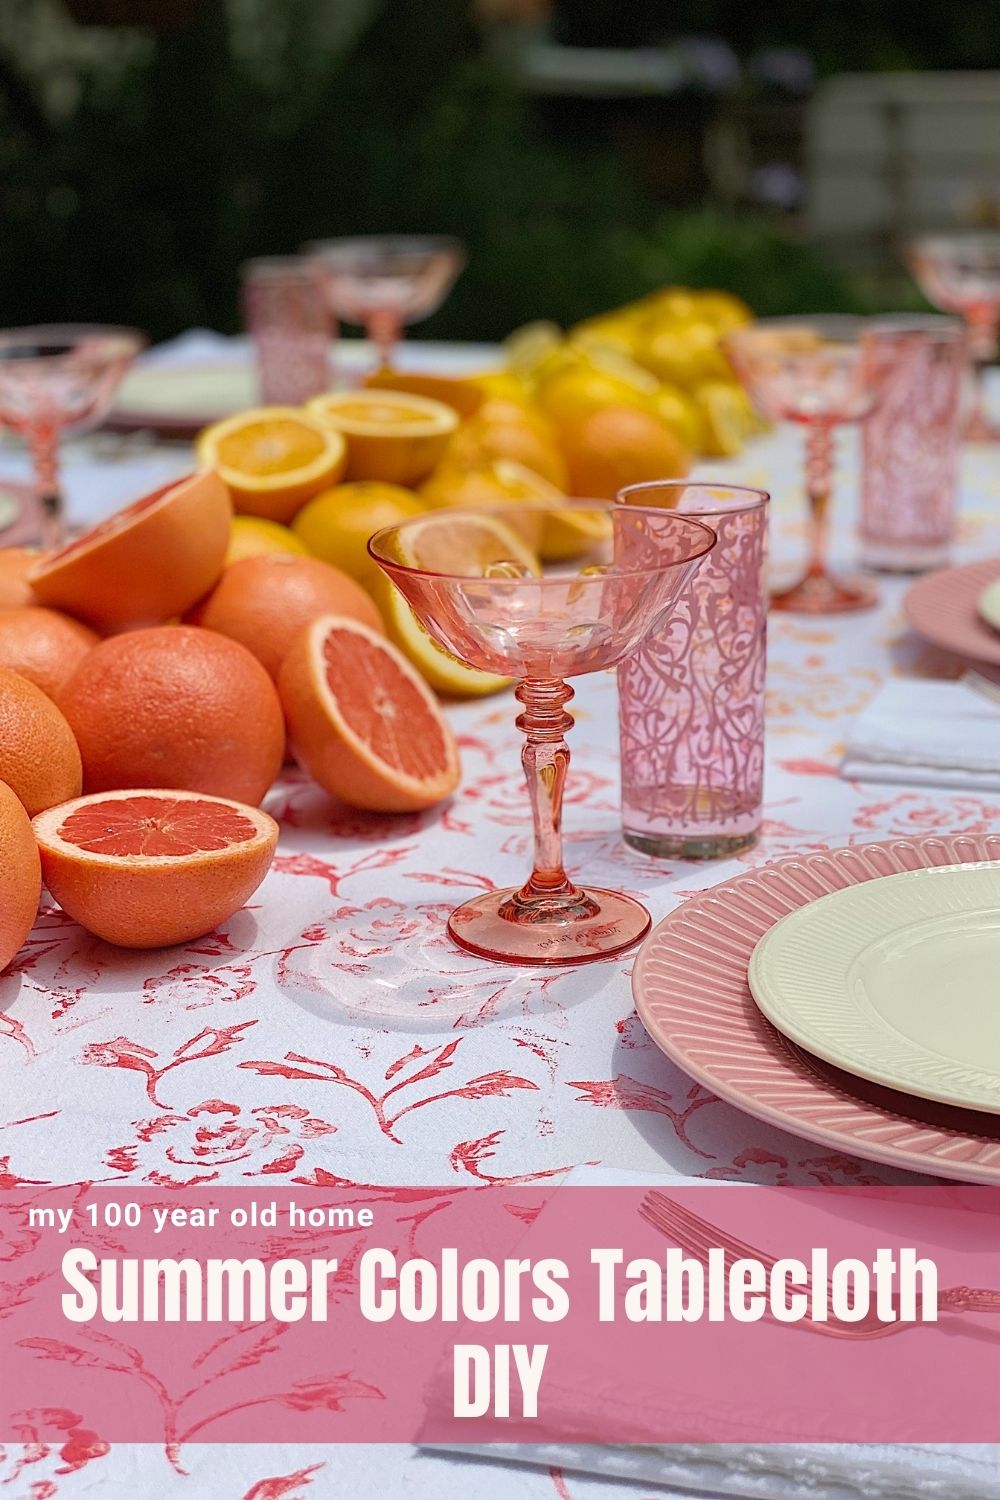 Look how I rescued this stained tablecloth by painting it in summer colors with a paint roller. It looks perfect on my citrus themed table!